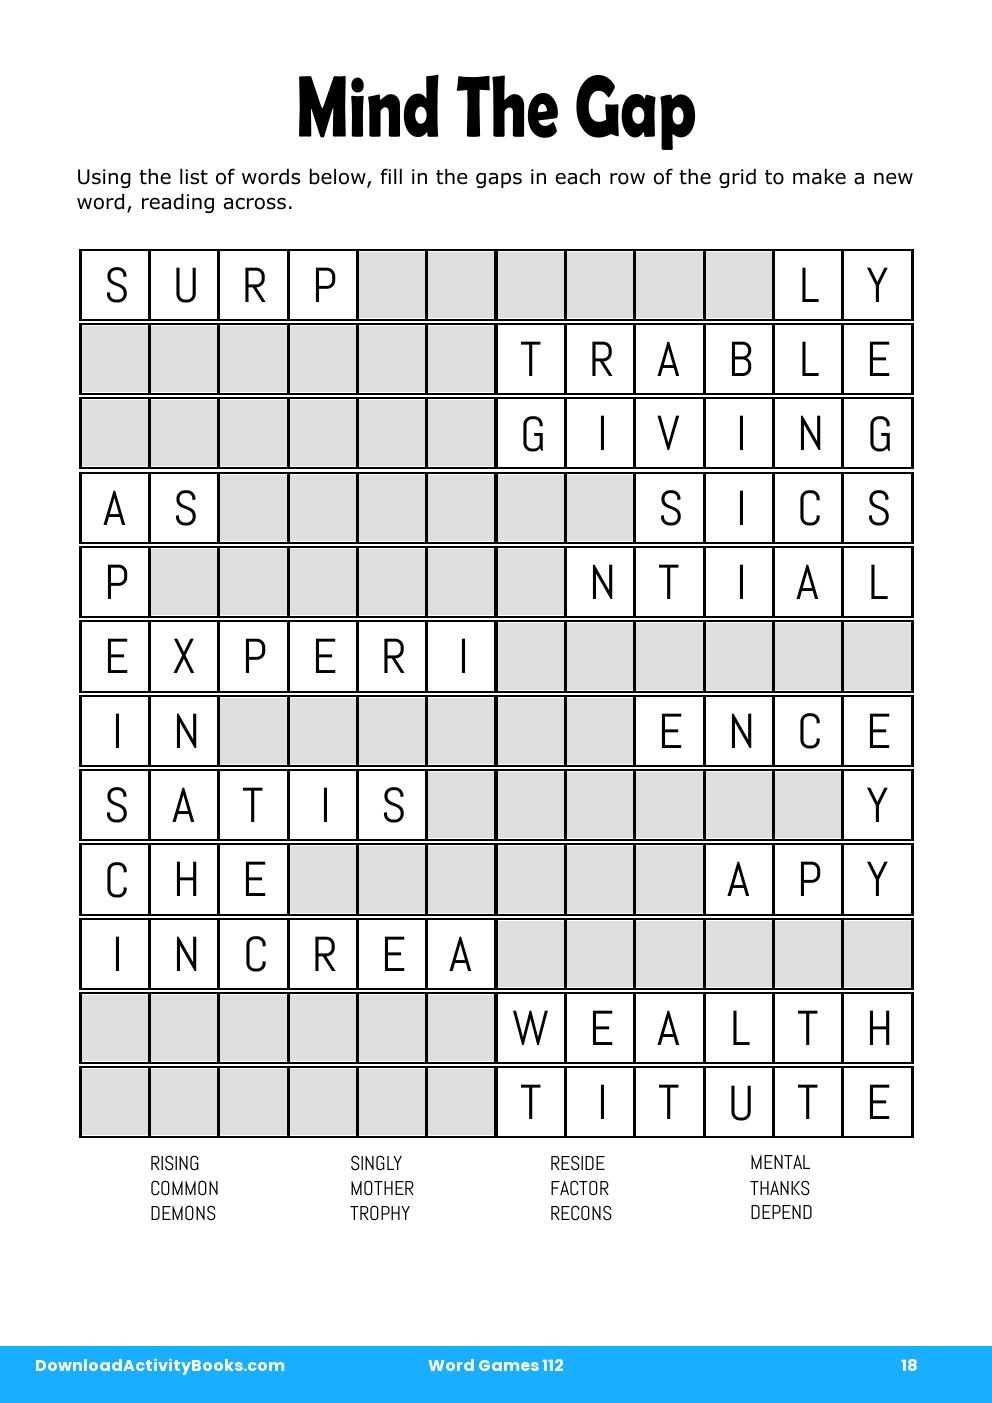 Mind The Gap in Word Games 112